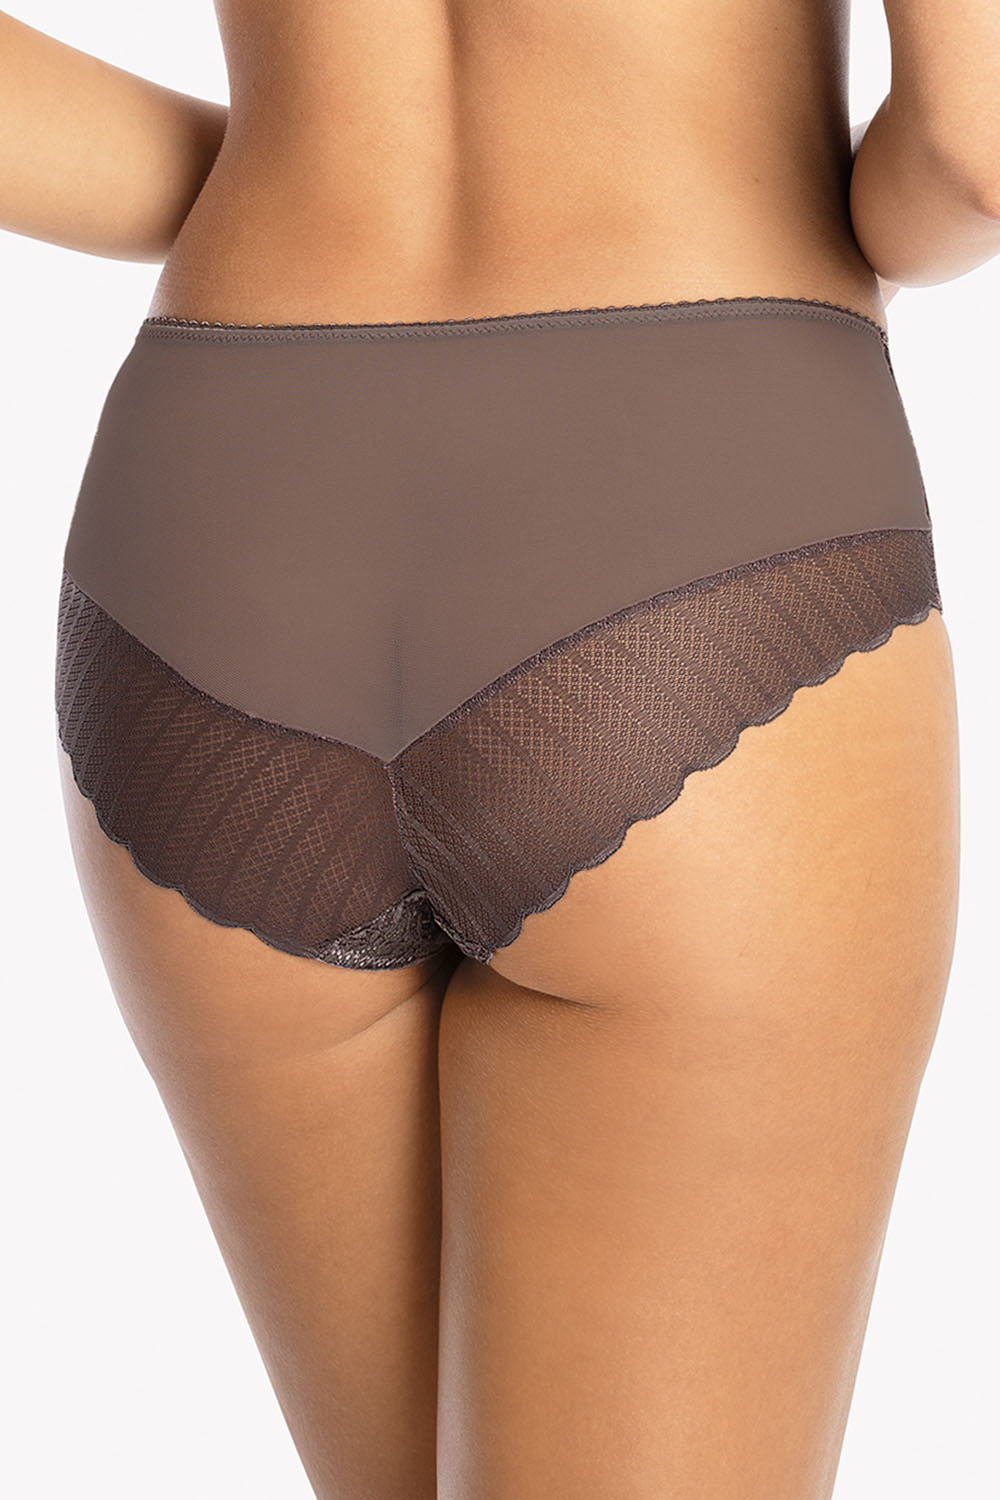 Ladies Briefs with Lace